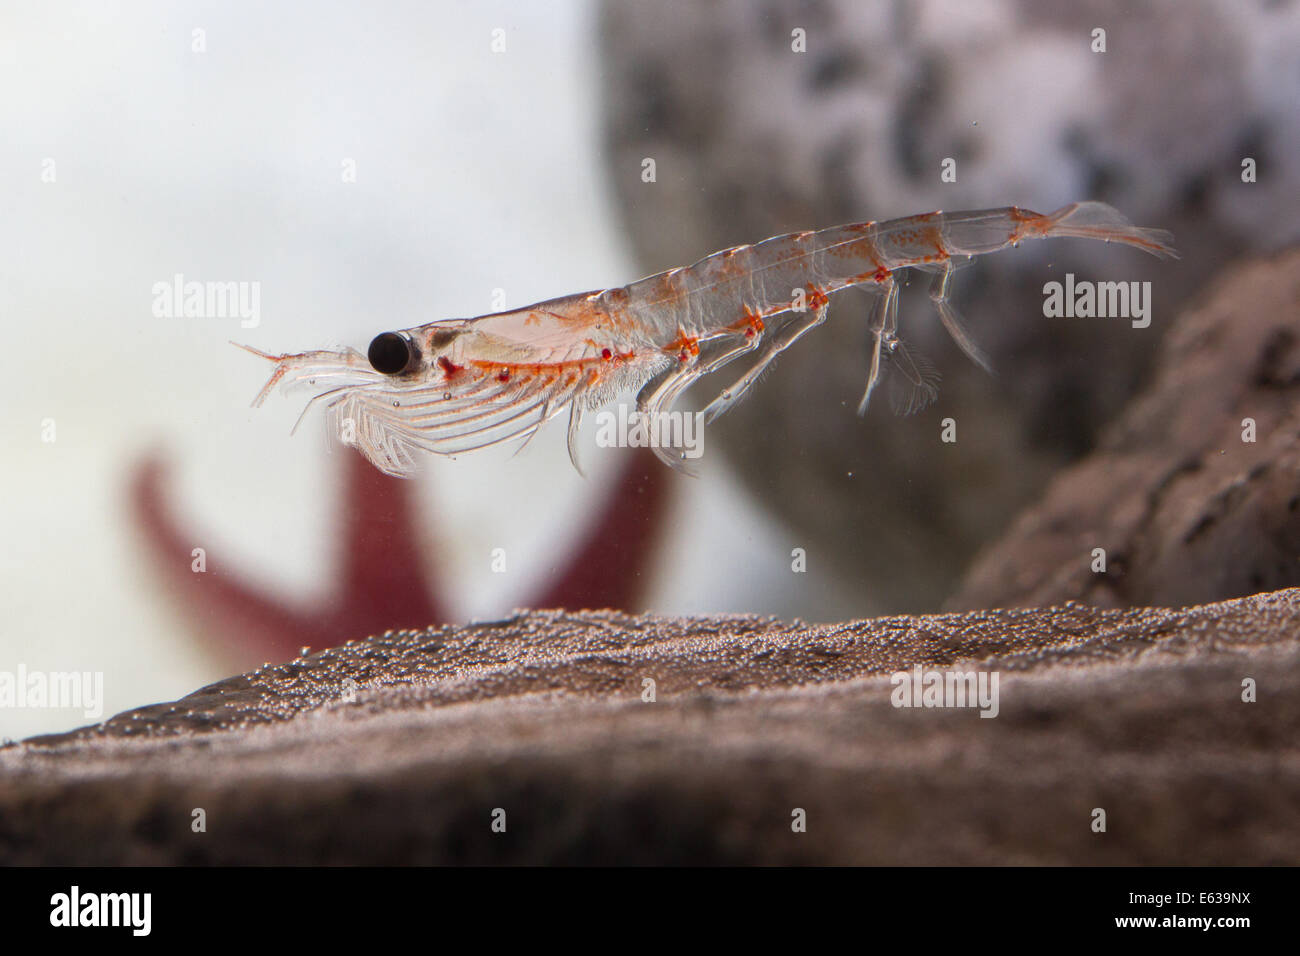 Antarctic krill, which floats in the water near the rocks Stock Photo